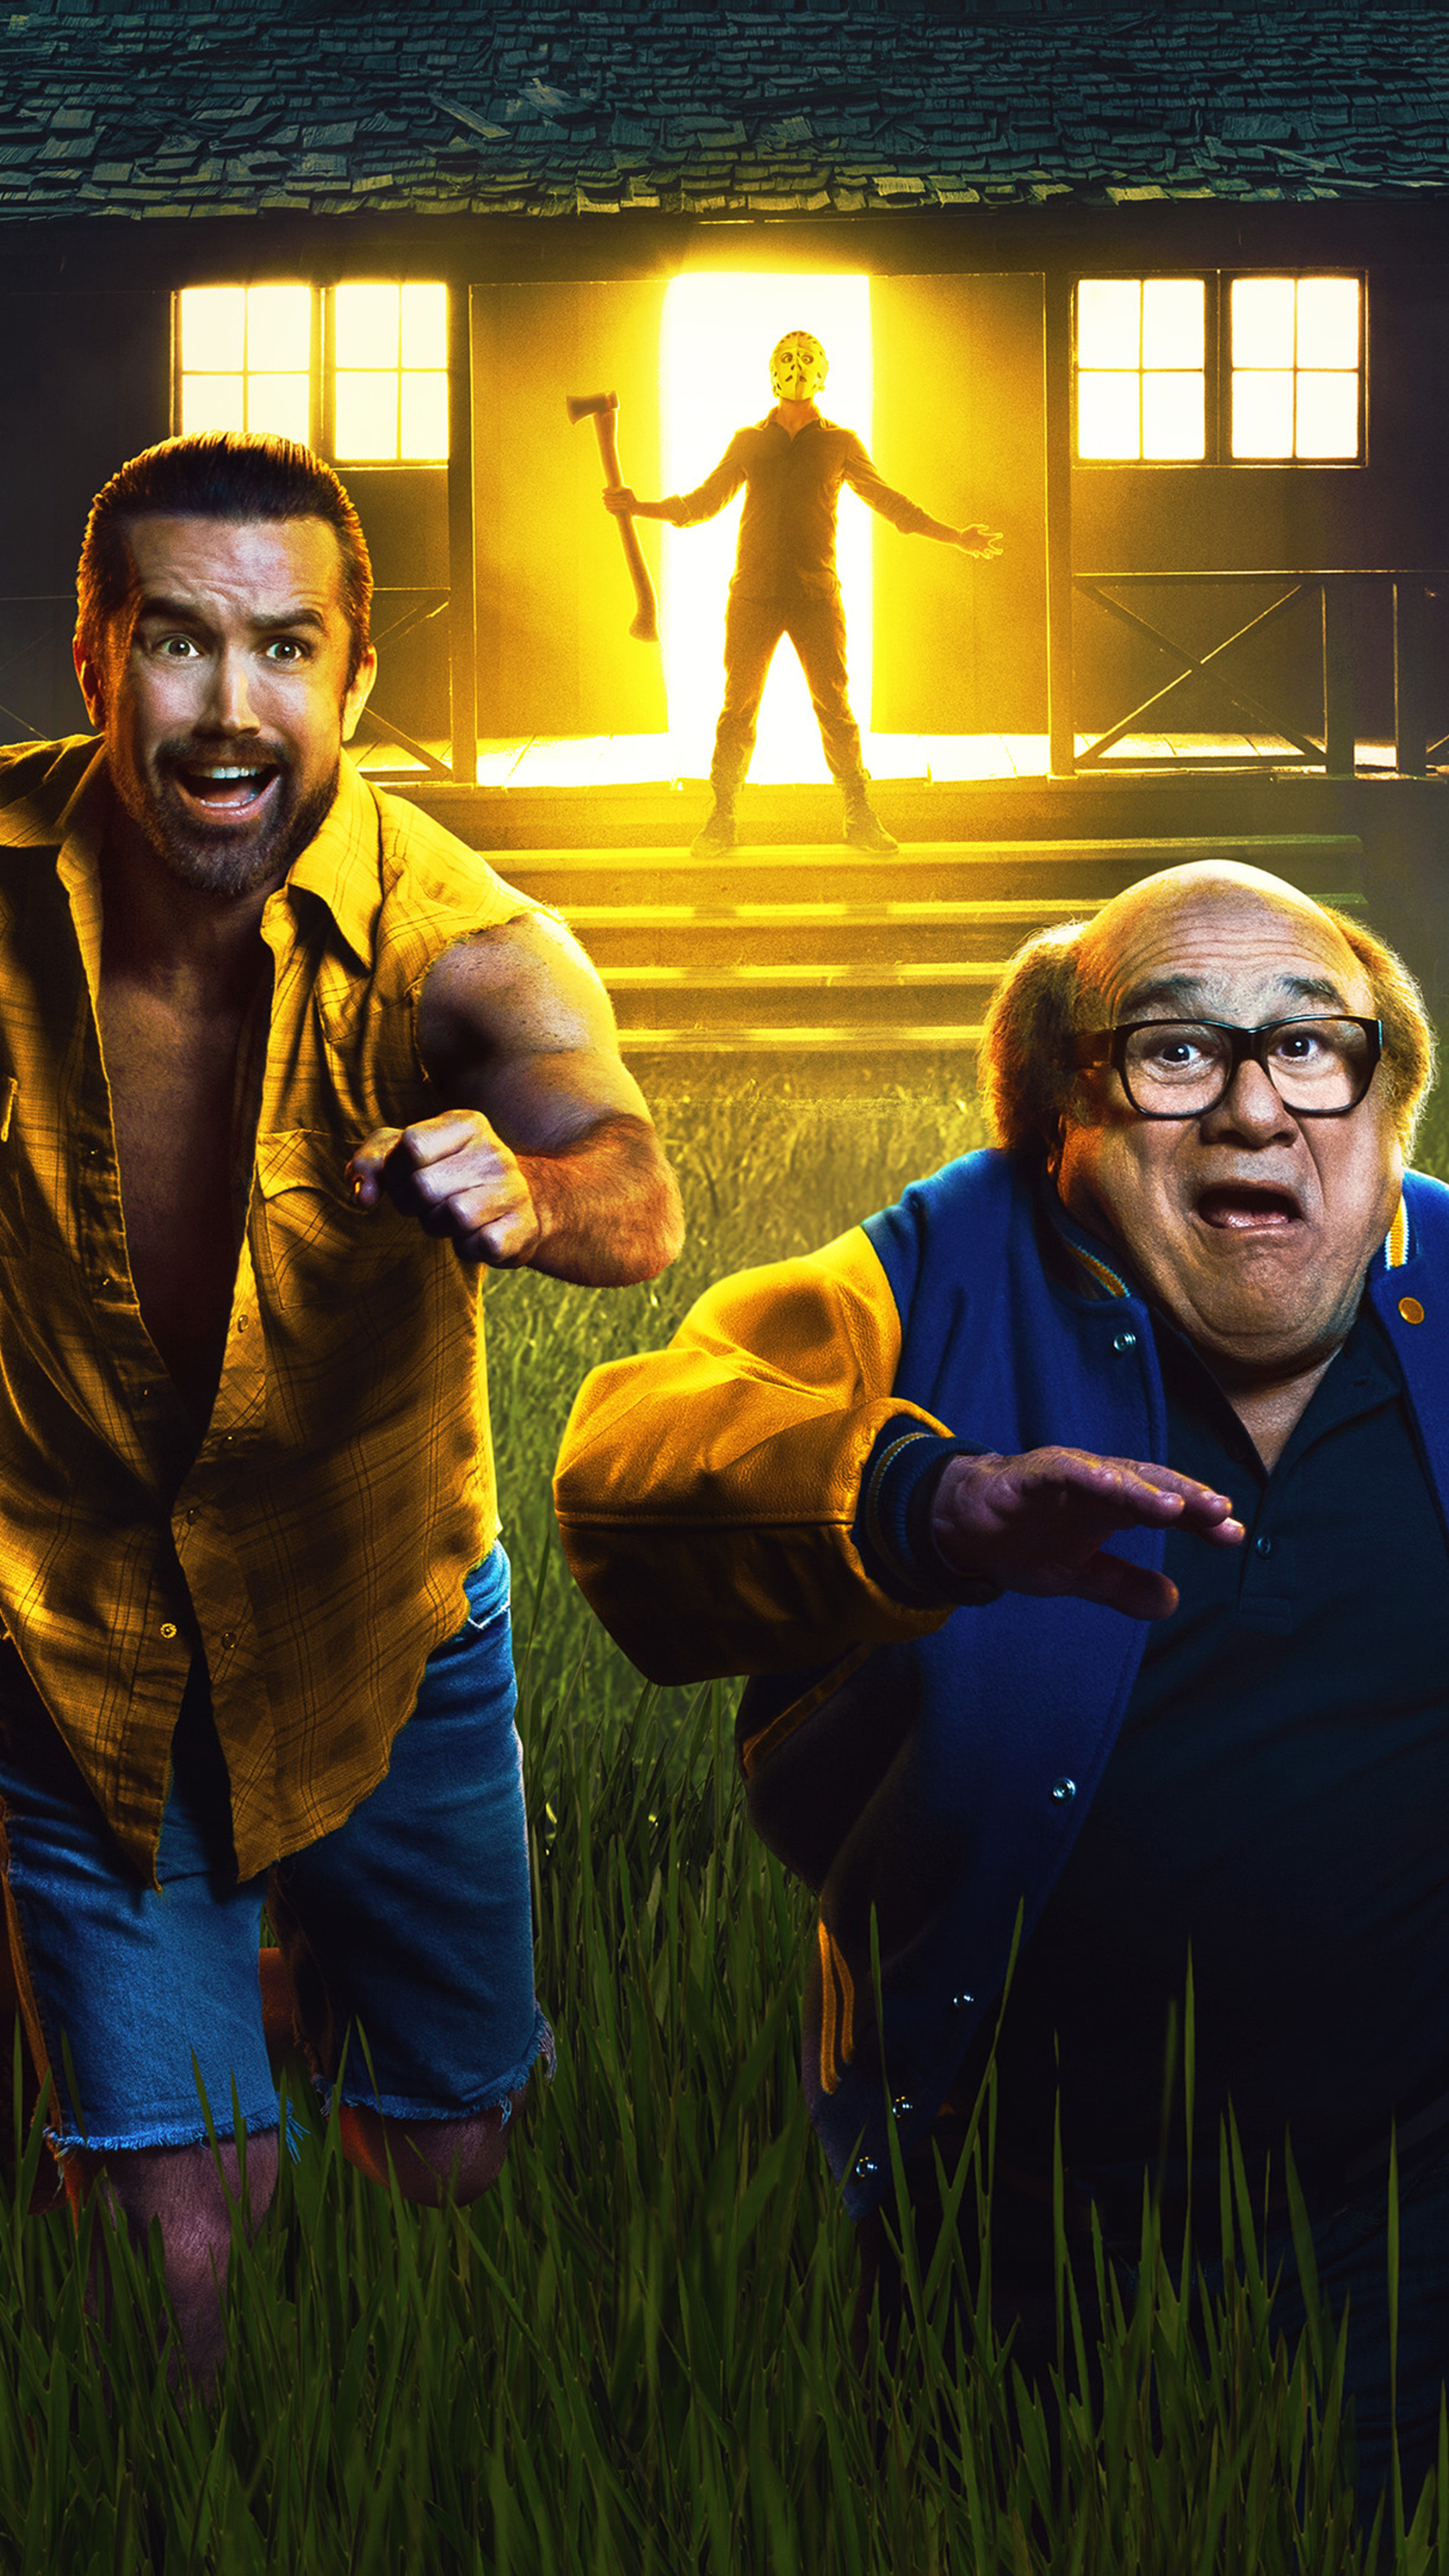 It's Always Sunny in Philadelphia (TV Series): An American comedy television series, Frank Reynolds, The father of Dennis and Dee Reynolds. 2160x3840 4K Wallpaper.